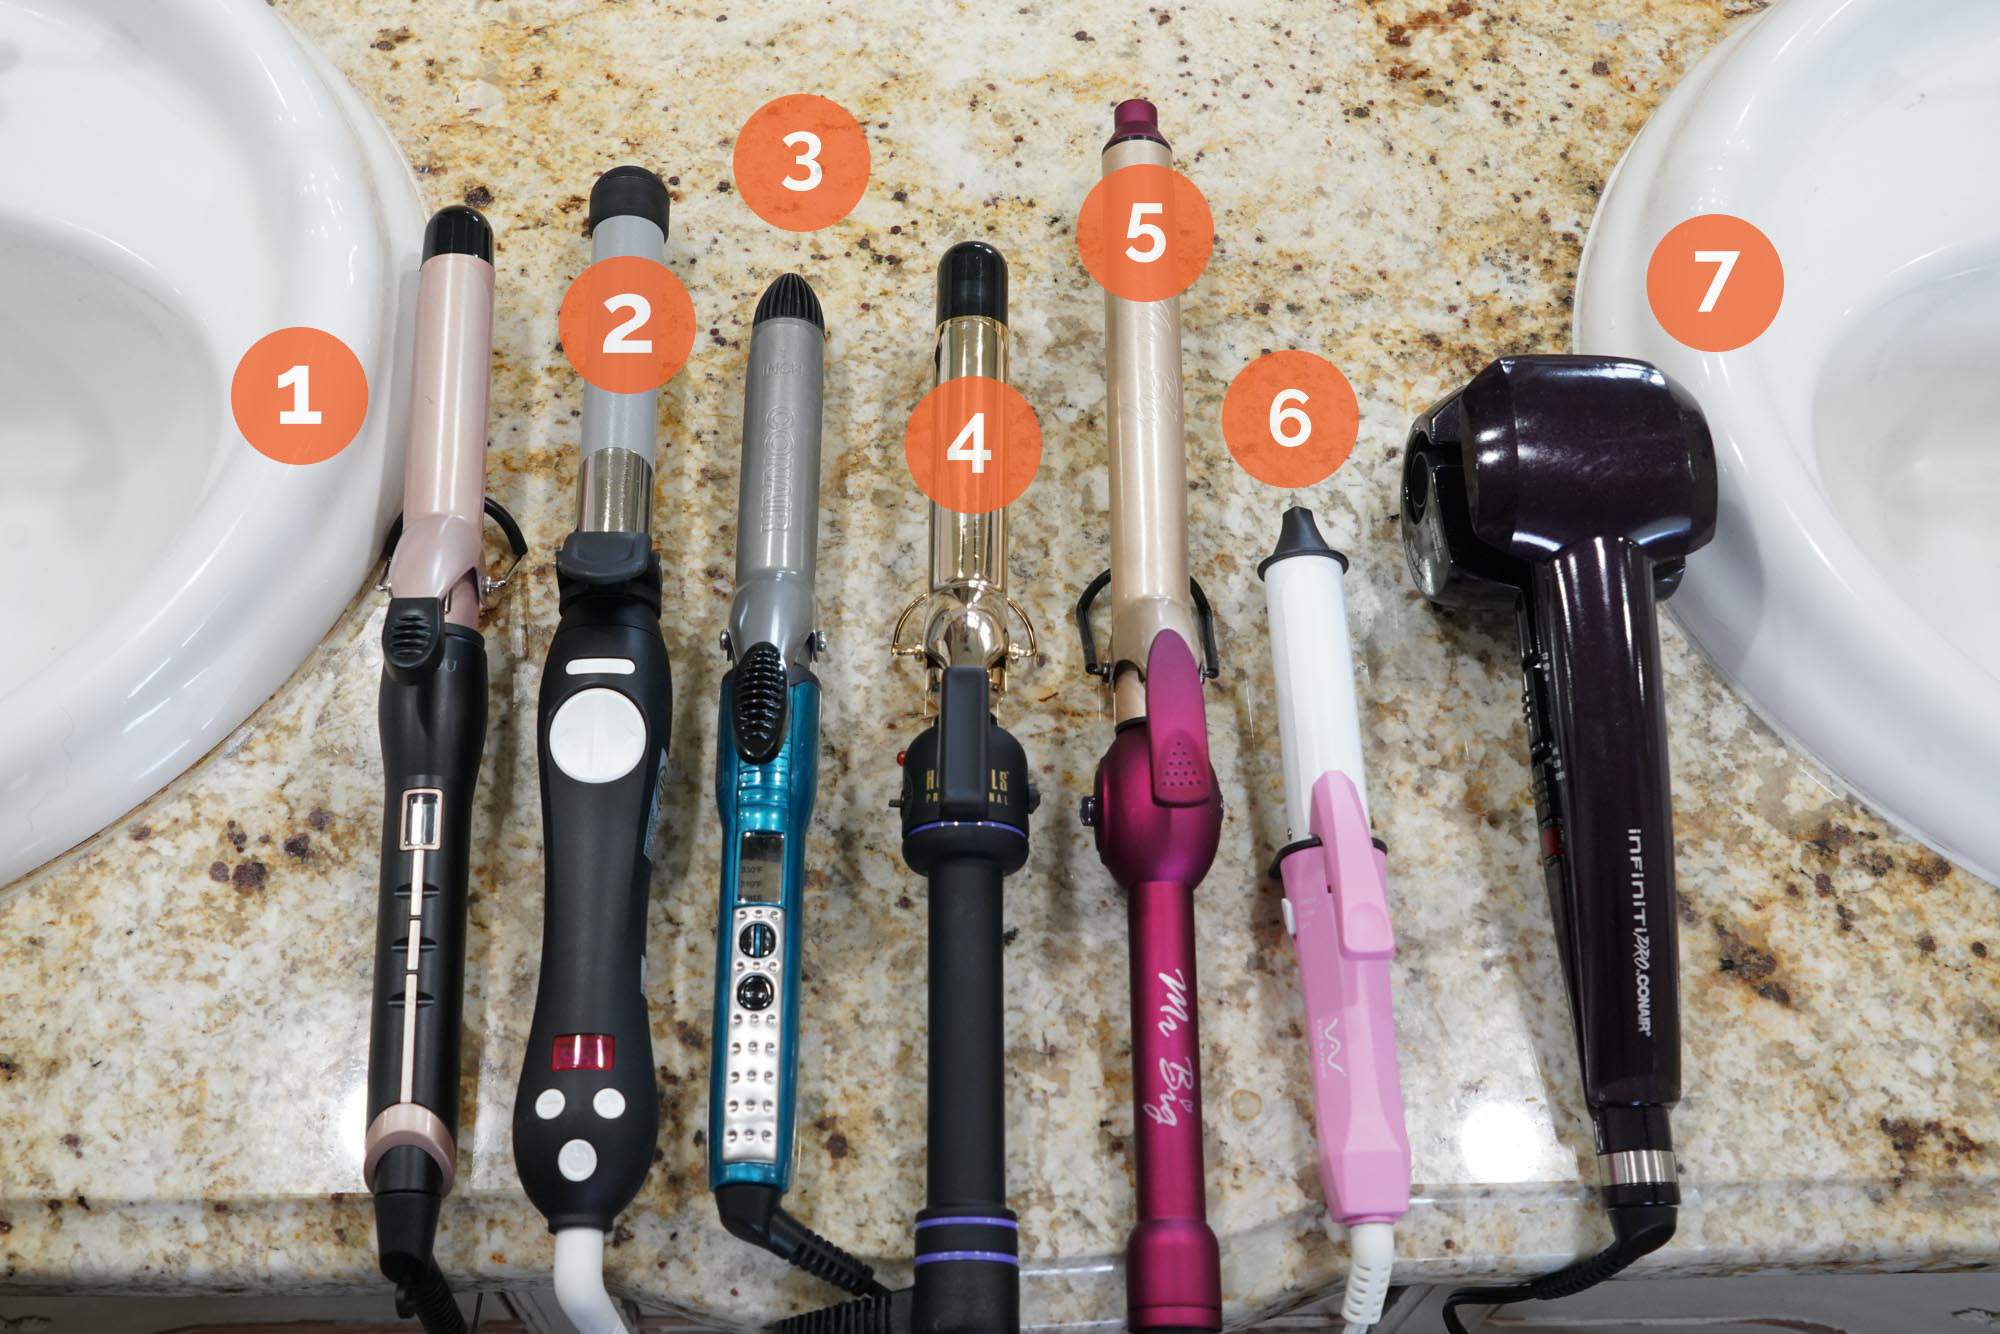 Seven curling irons with graphic numbers below